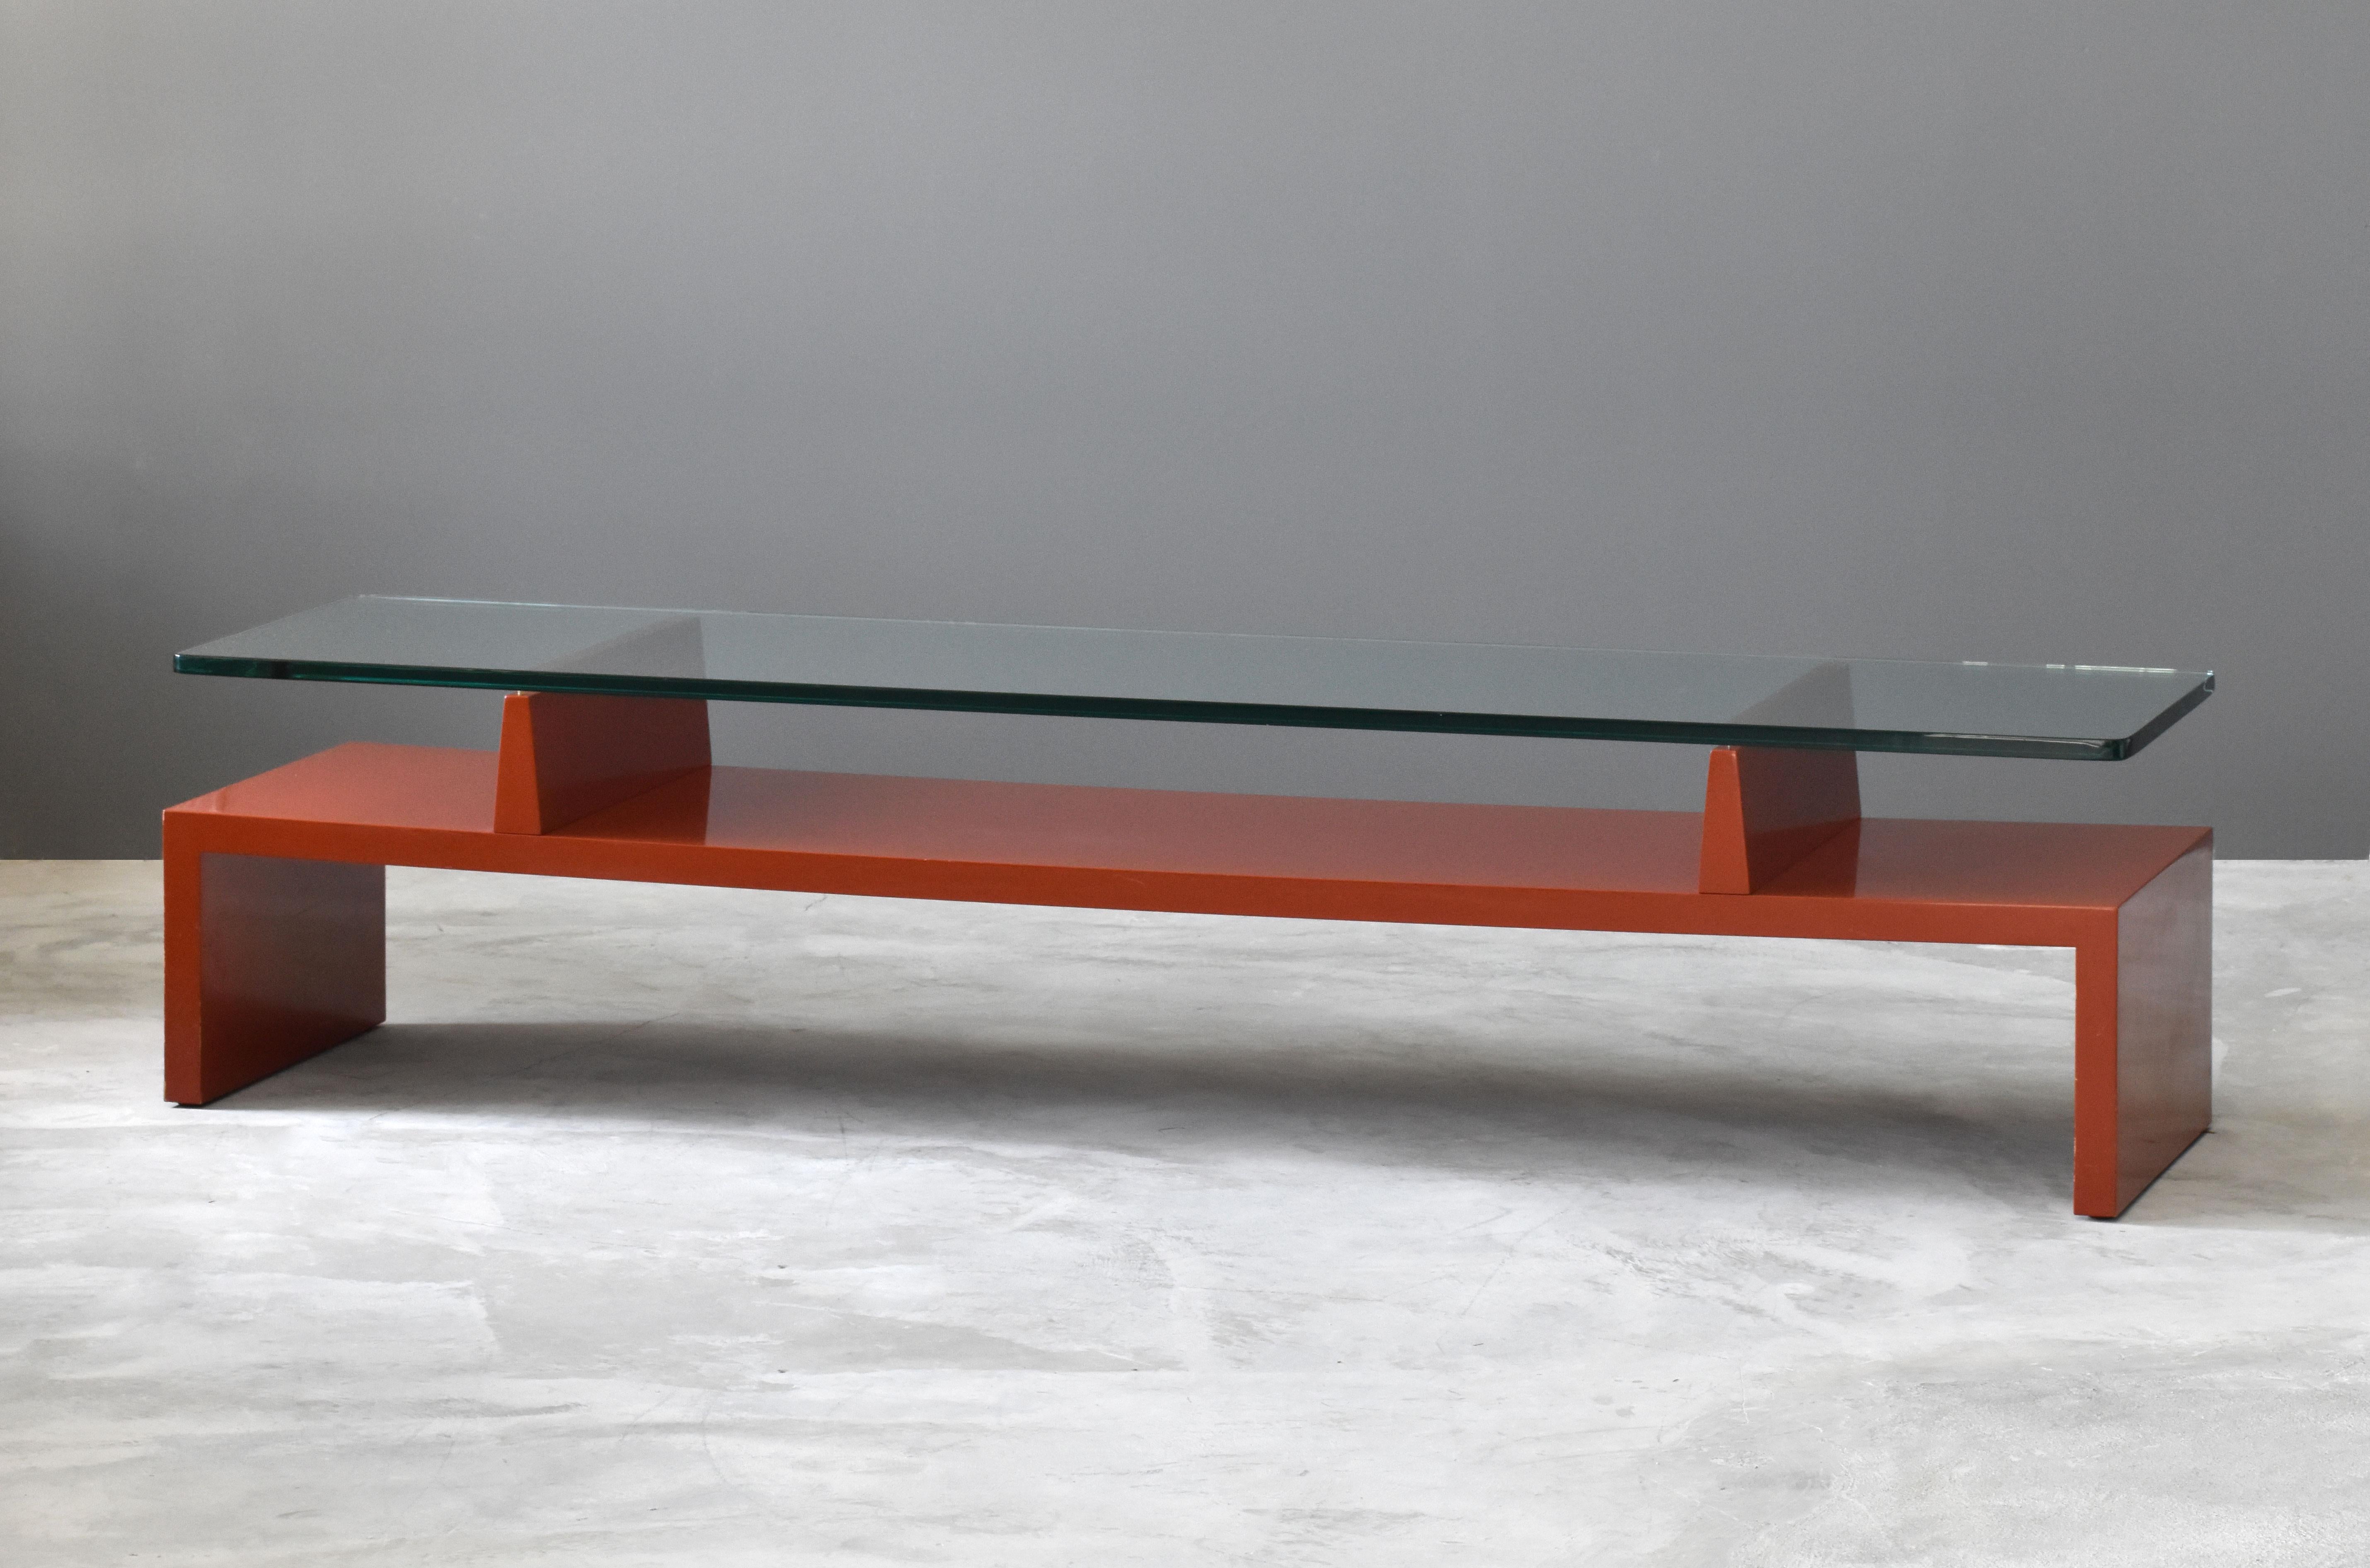 A rare and Minimalist coffee / cocktail table, designed by Tommi Parzinger and produced by his own firm, Parzinger Originals. 

Parzinger manages to enliven a Minimalist form by lacquering it in deep cinnober red, the iconic pigment employed as